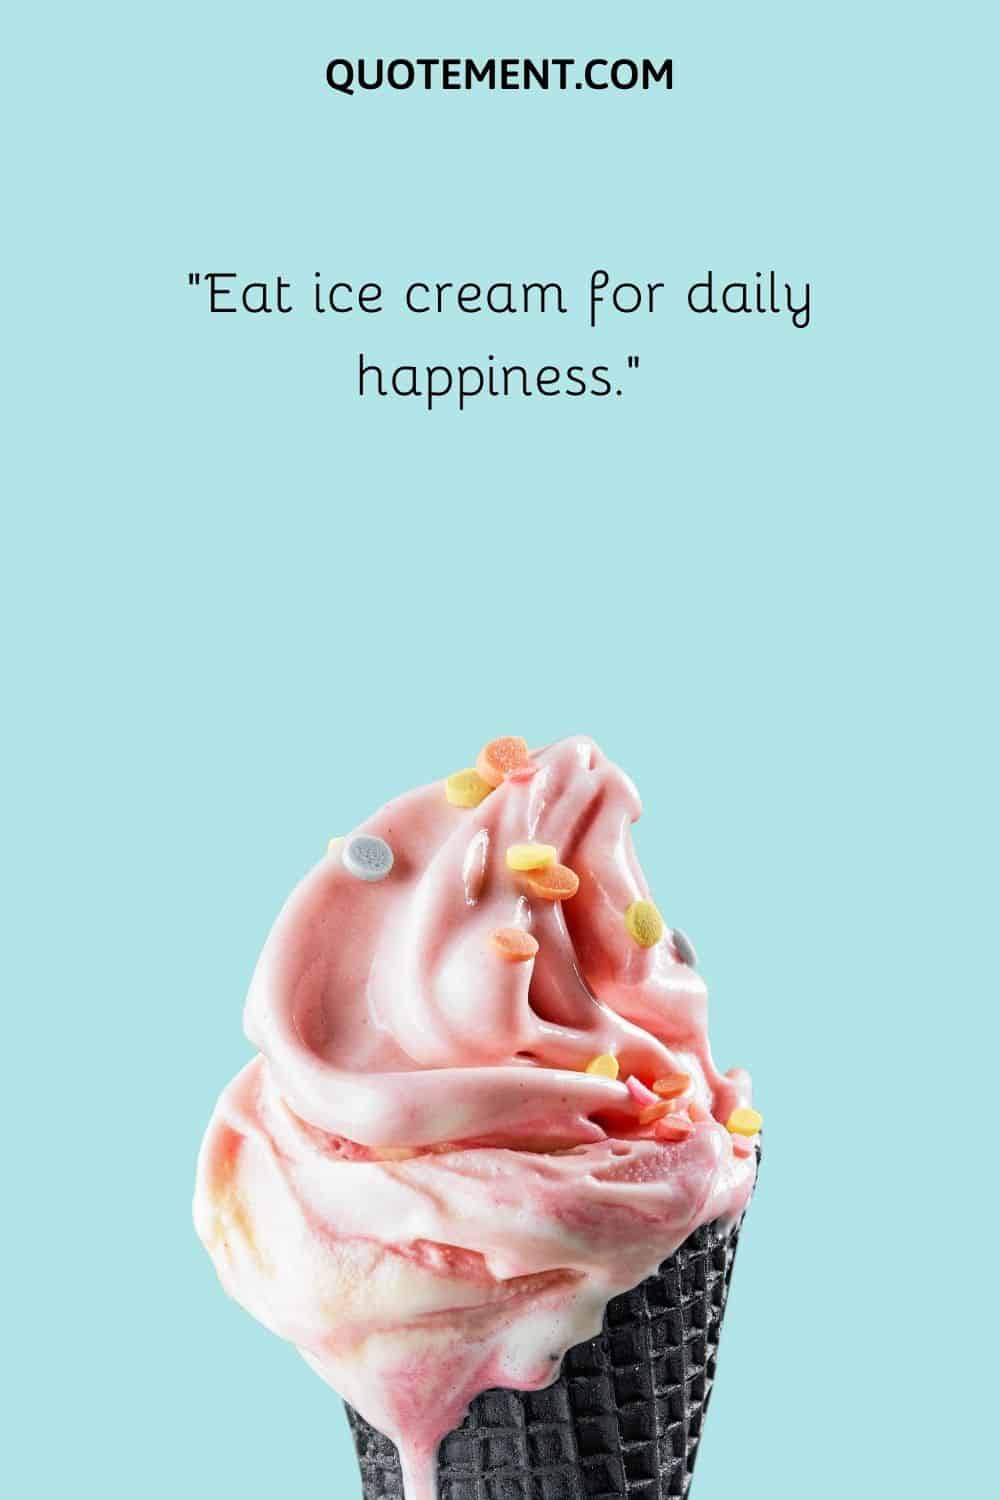 Eat ice cream for daily happiness